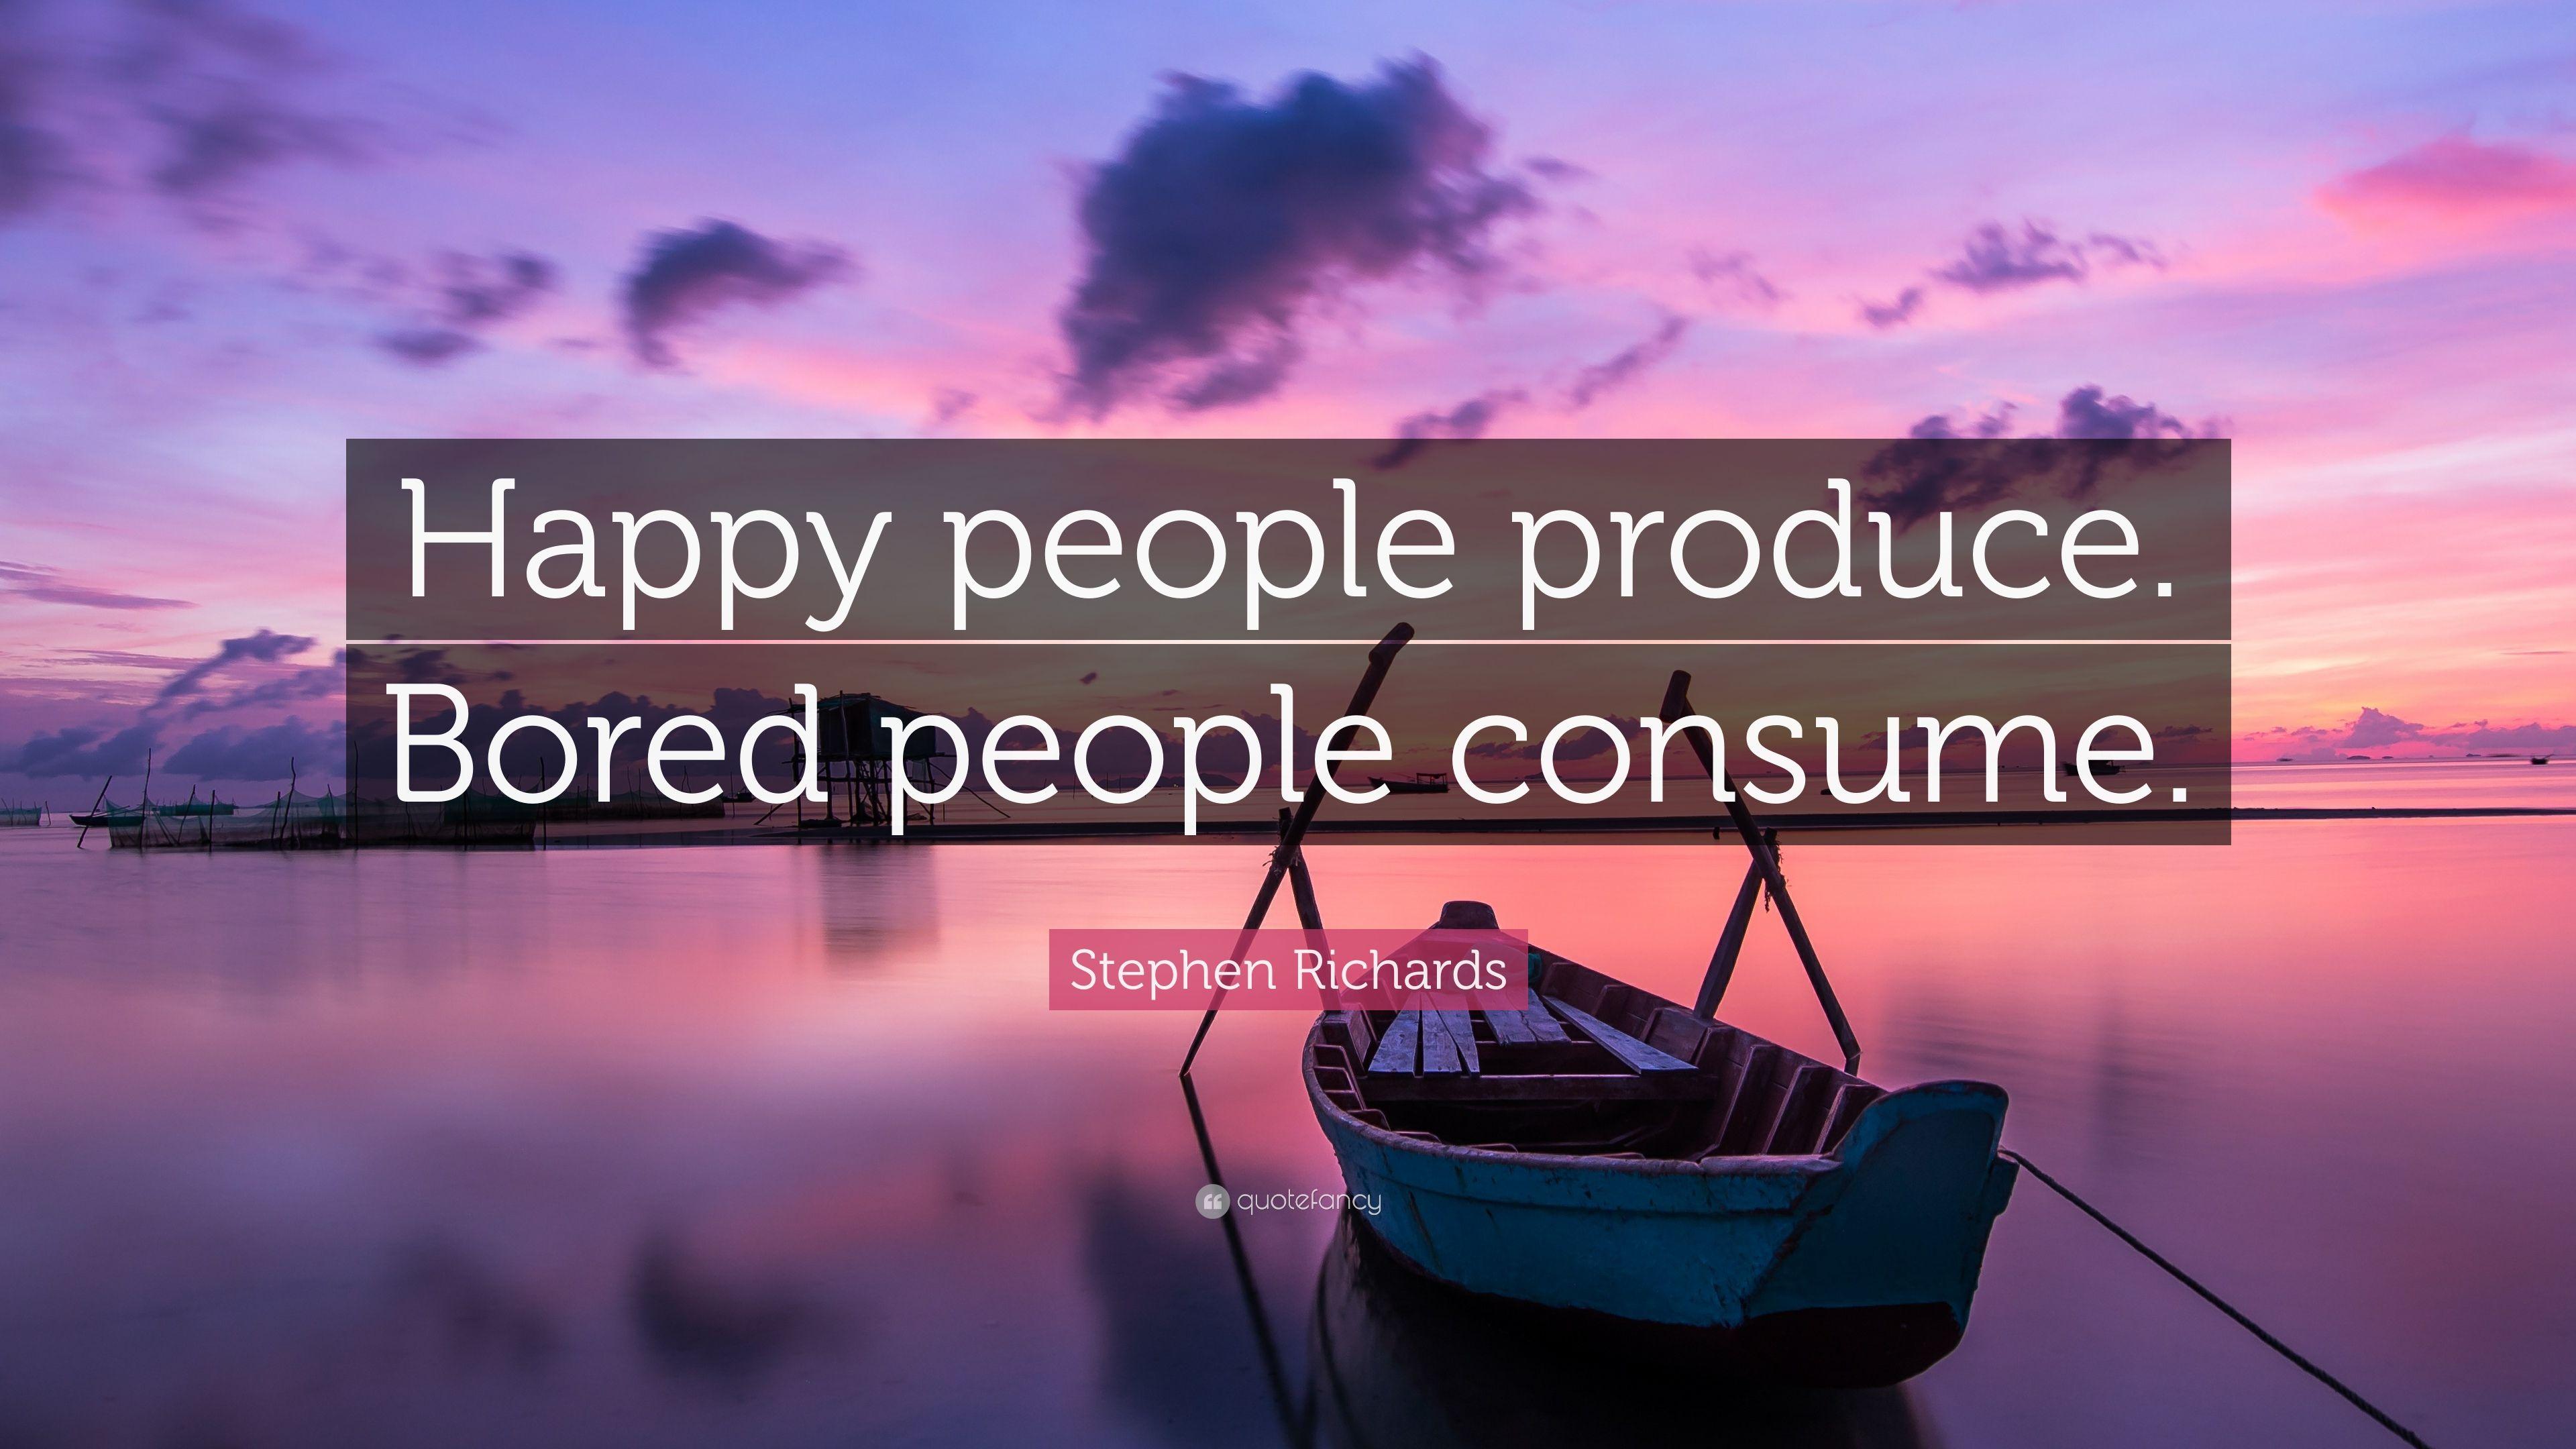 Stephen Richards Quote: “Happy people produce. Bored people consume